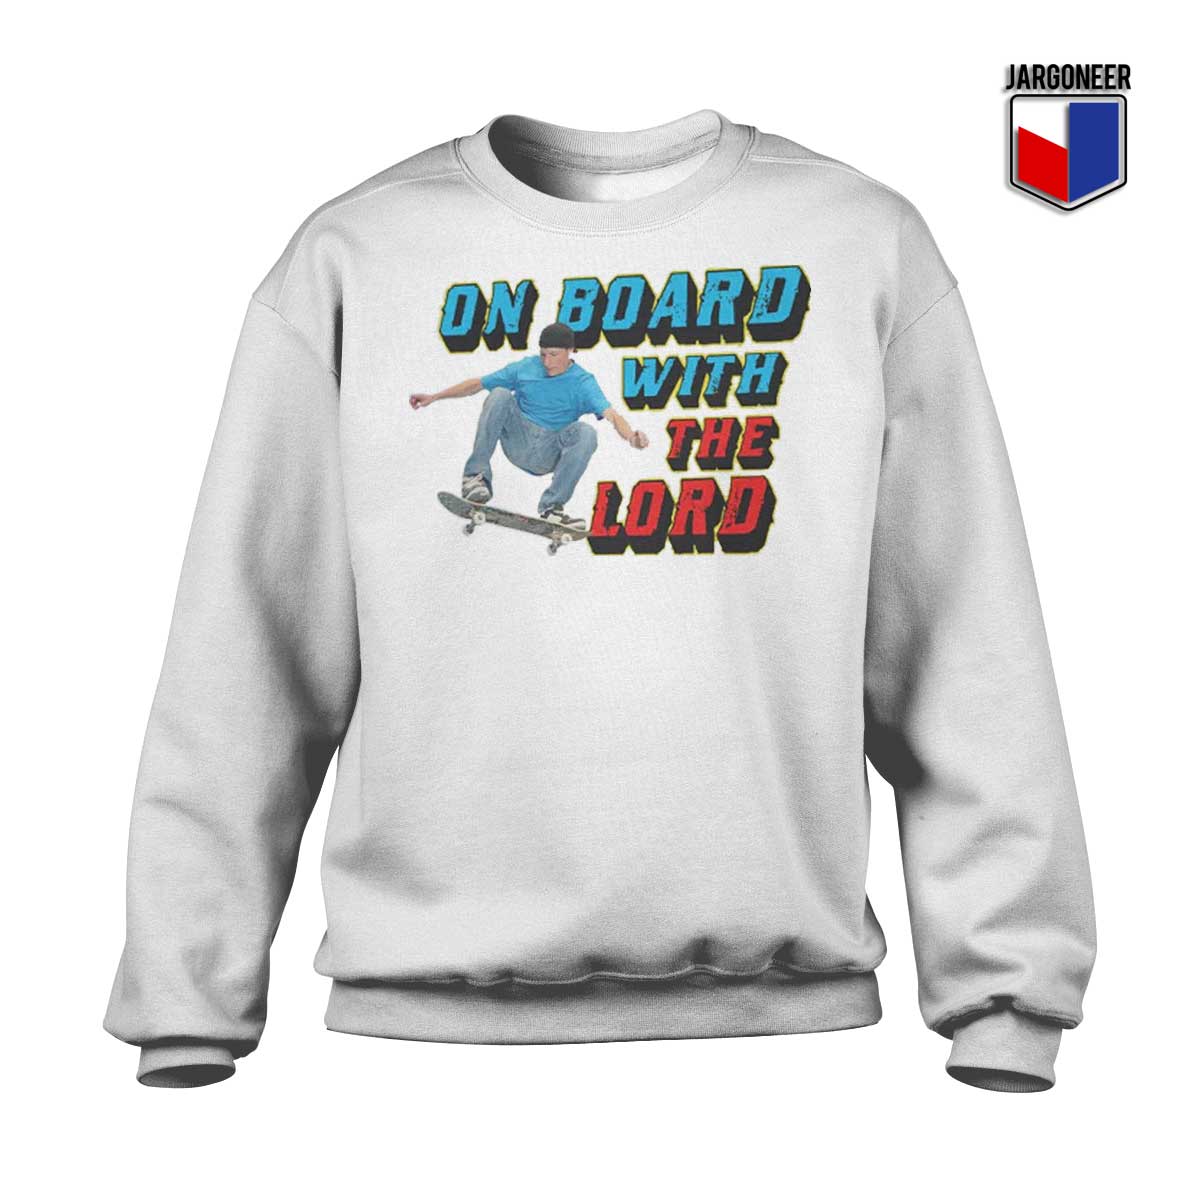 On Board With The Lord White Sweatshirt - Shop Unique Graphic Cool Shirt Designs